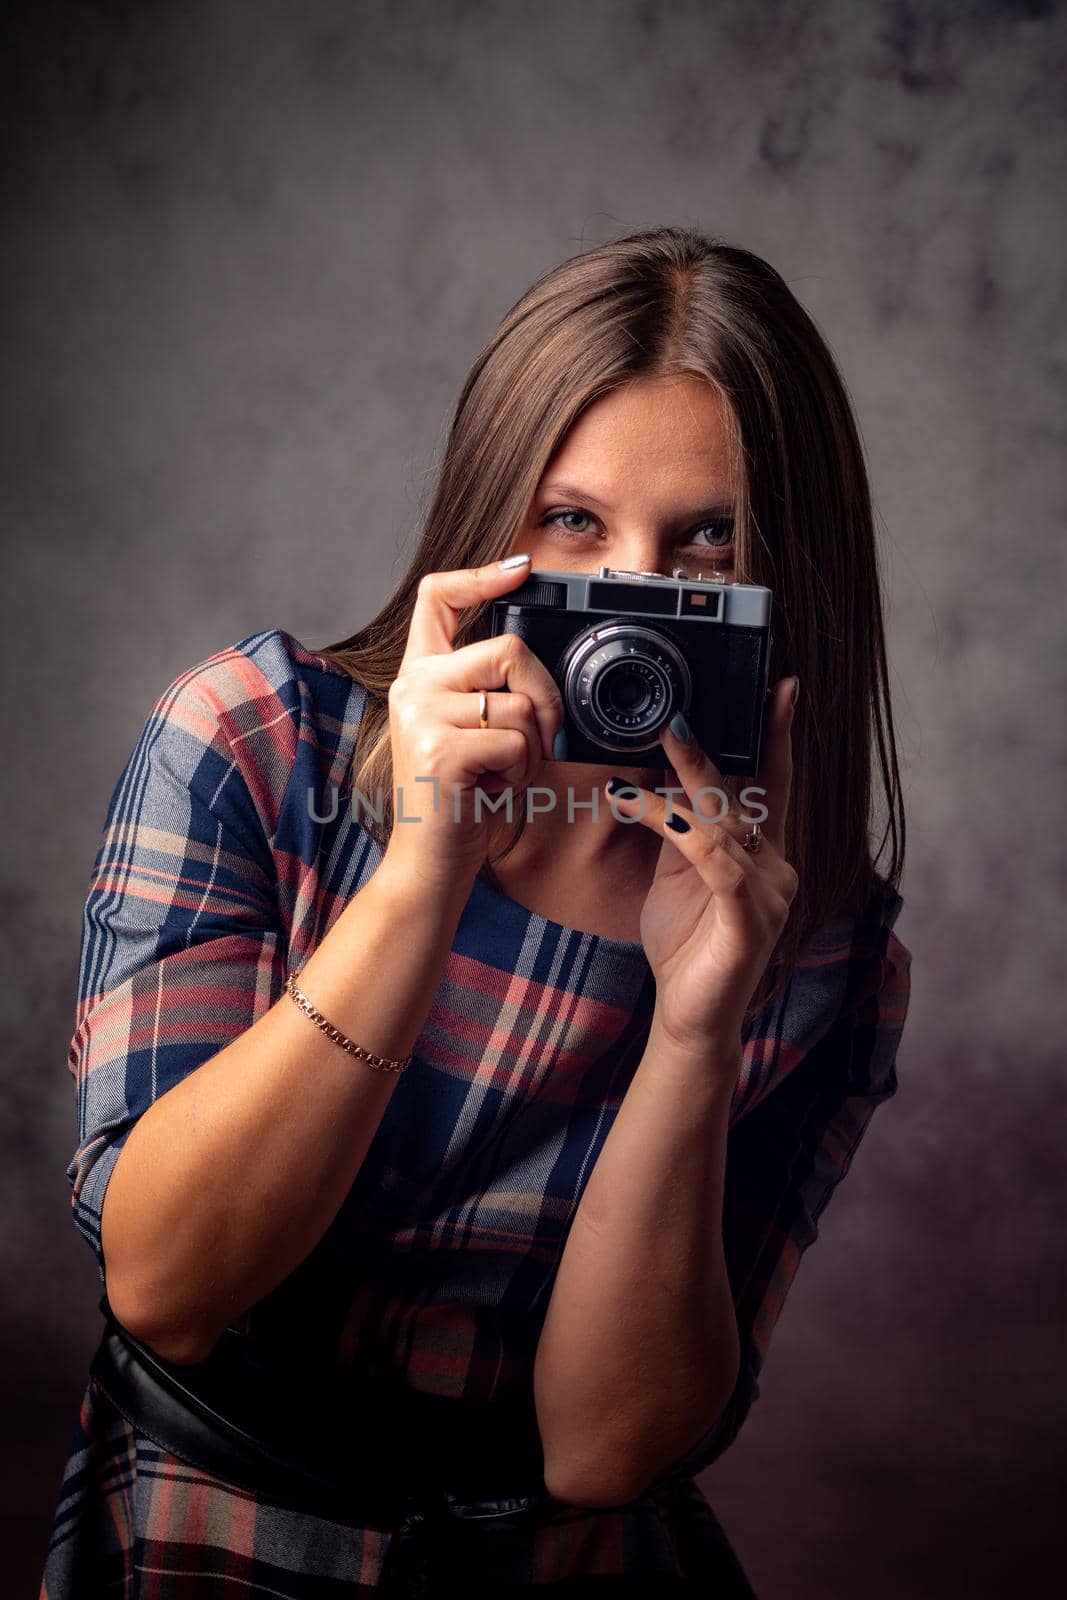 Girl photographer peeking out from behind the camera, half-length studio portrait on a gray background by Madhourse